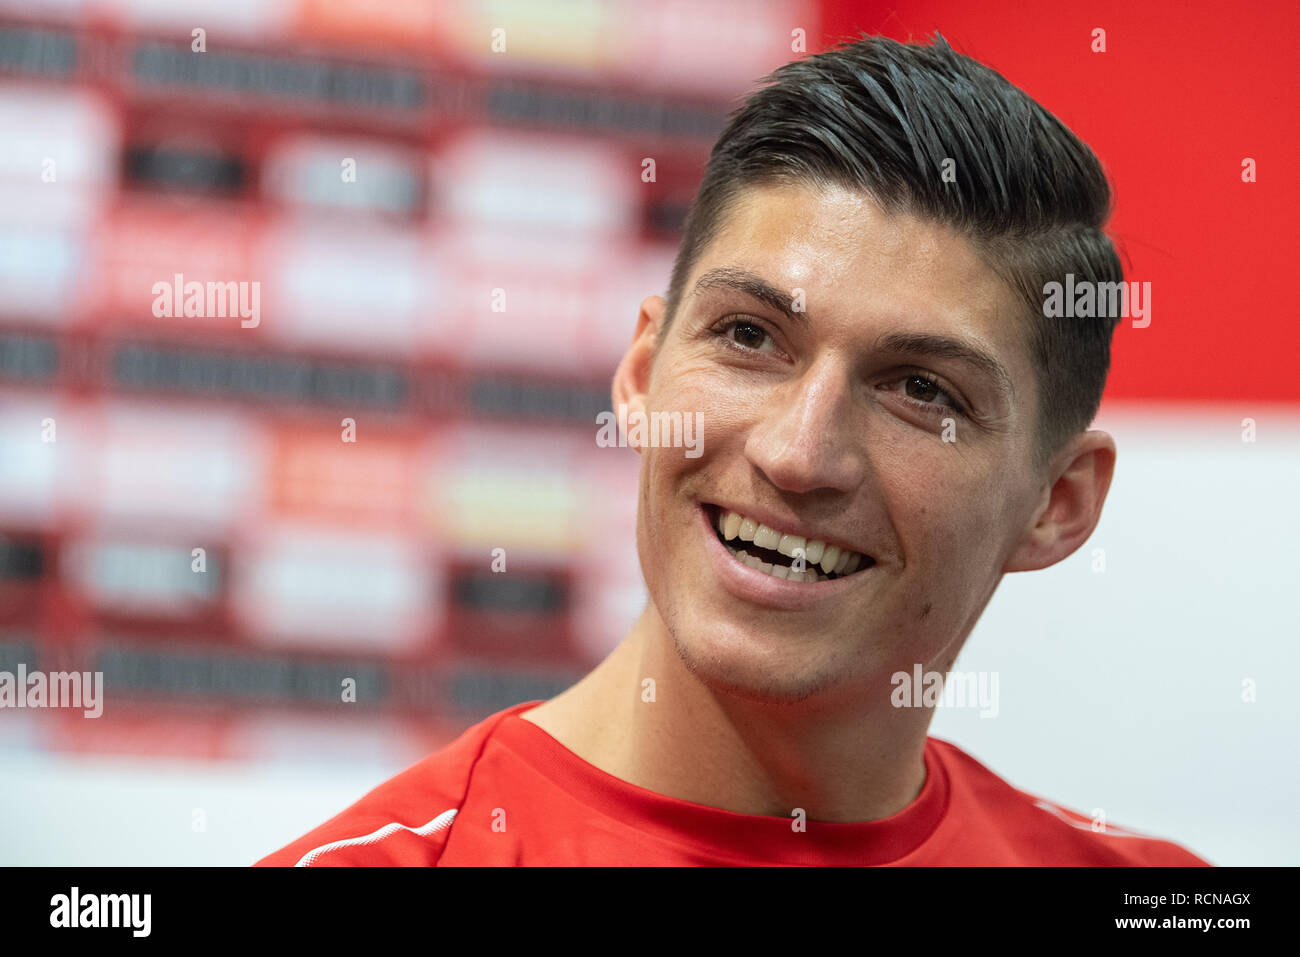 Stuttgart, Germany. 16th Jan, 2019. Steven Zuber, new player at VfB Stuttgart, speaks during a press conference. VfB has borrowed Zuber from TSG Hoffenheim for the second half of this season. Credit: Sebastian Gollnow/dpa/Alamy Live News Stock Photo